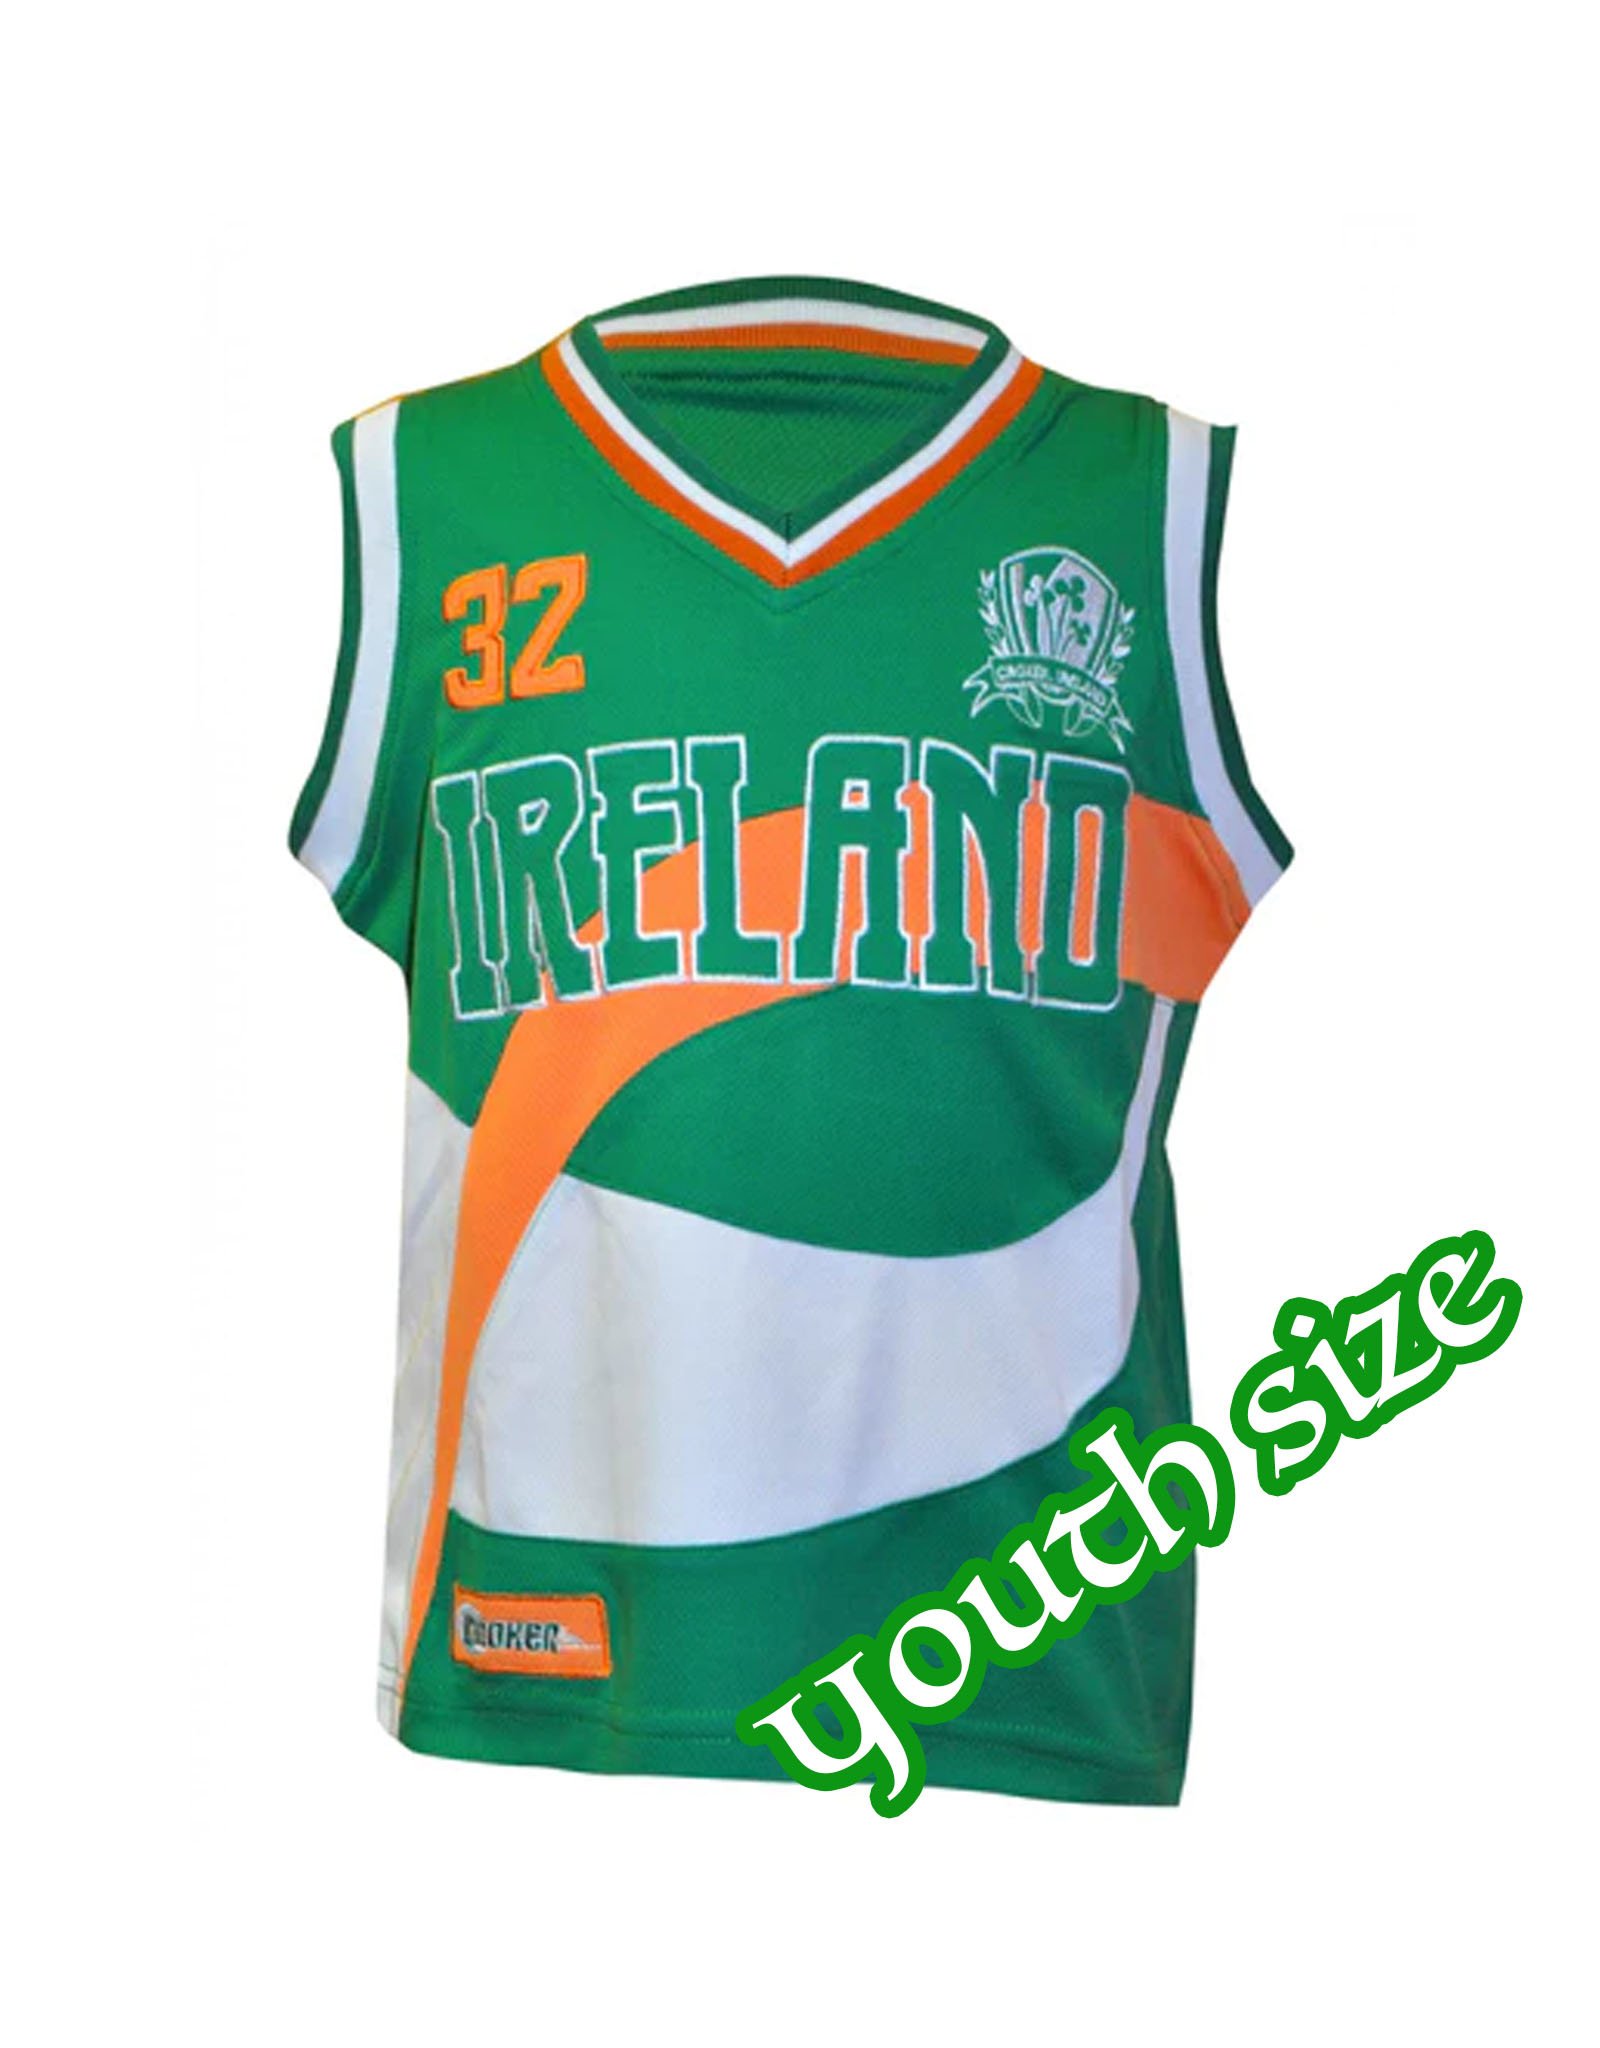 CAN I FIT A YOUTH SIZE NBA JERSEY?